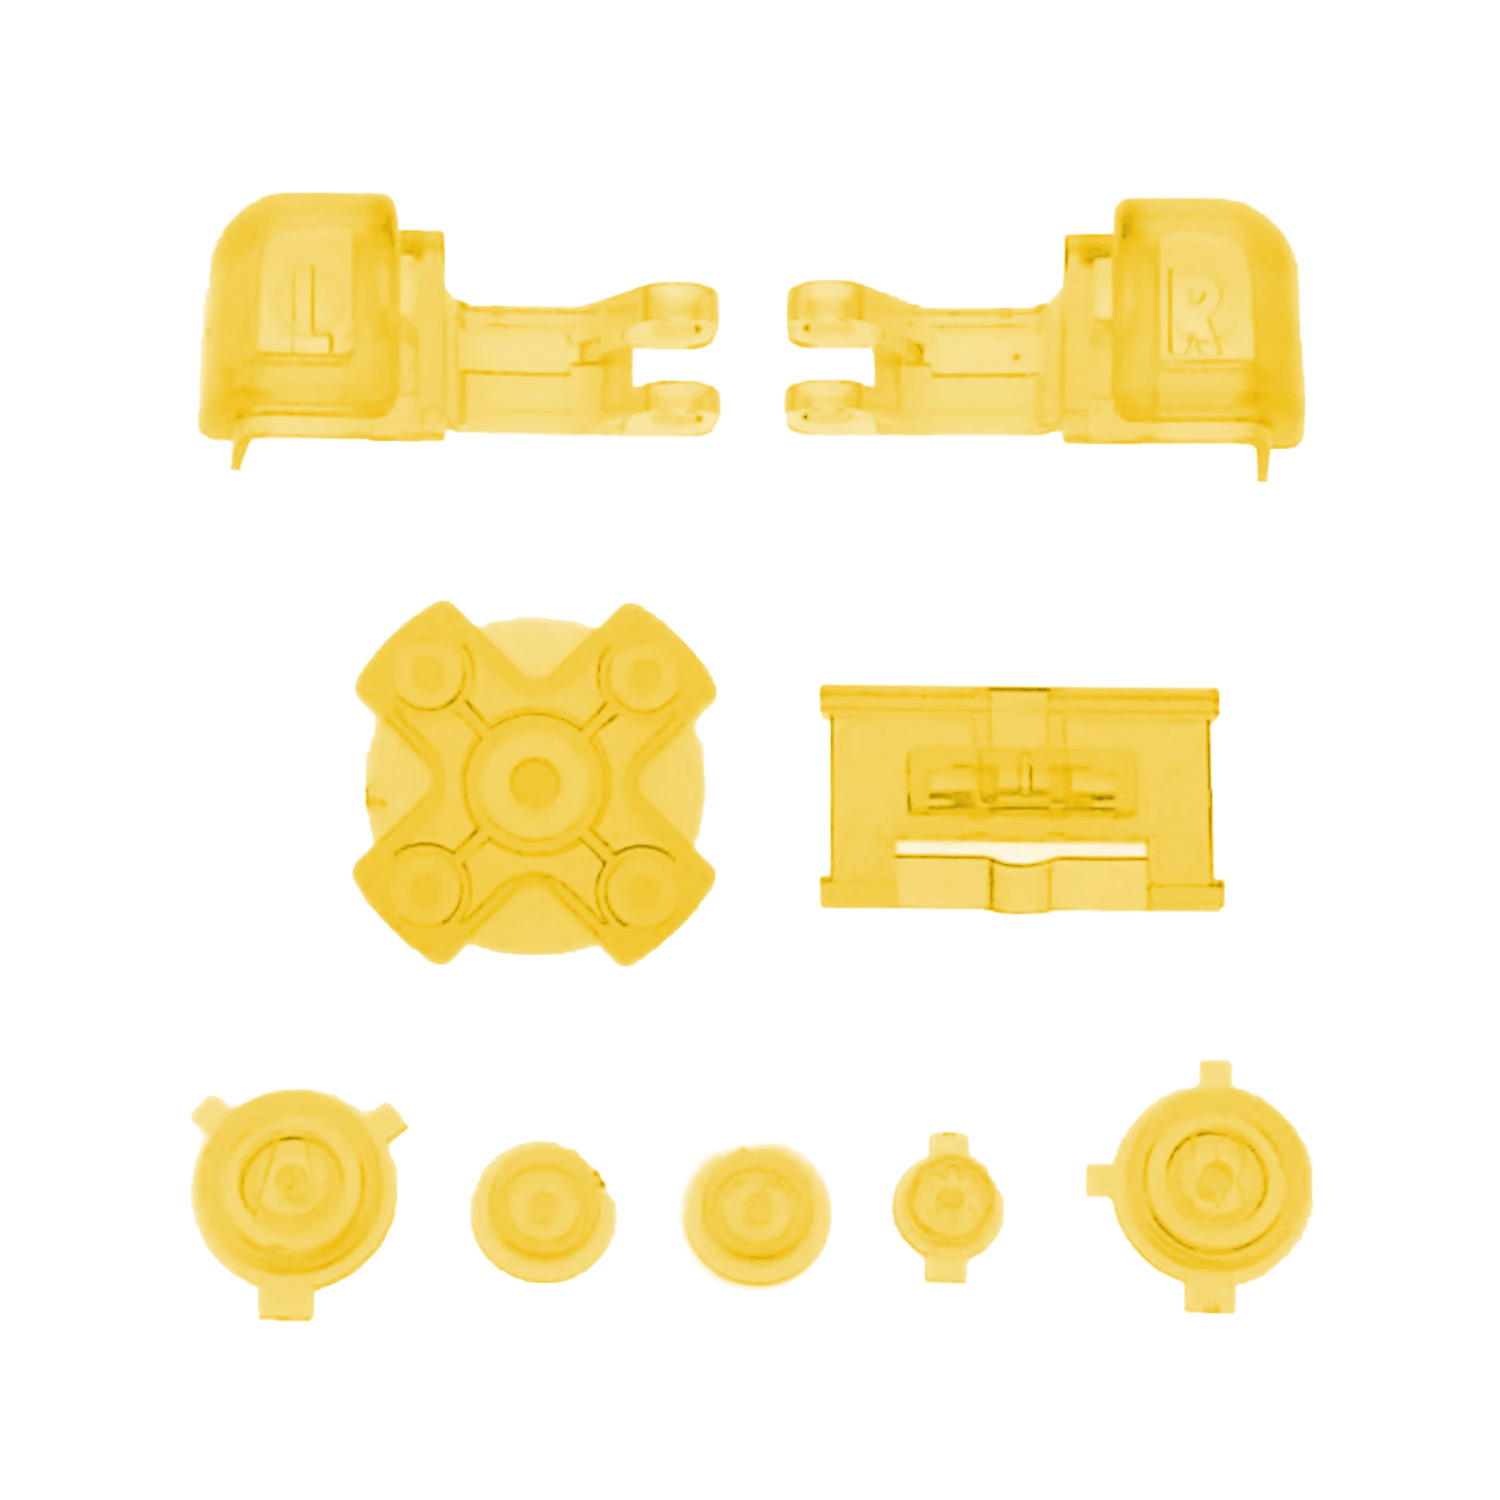 Game Boy Advance SP Buttons (Yellow Clear)